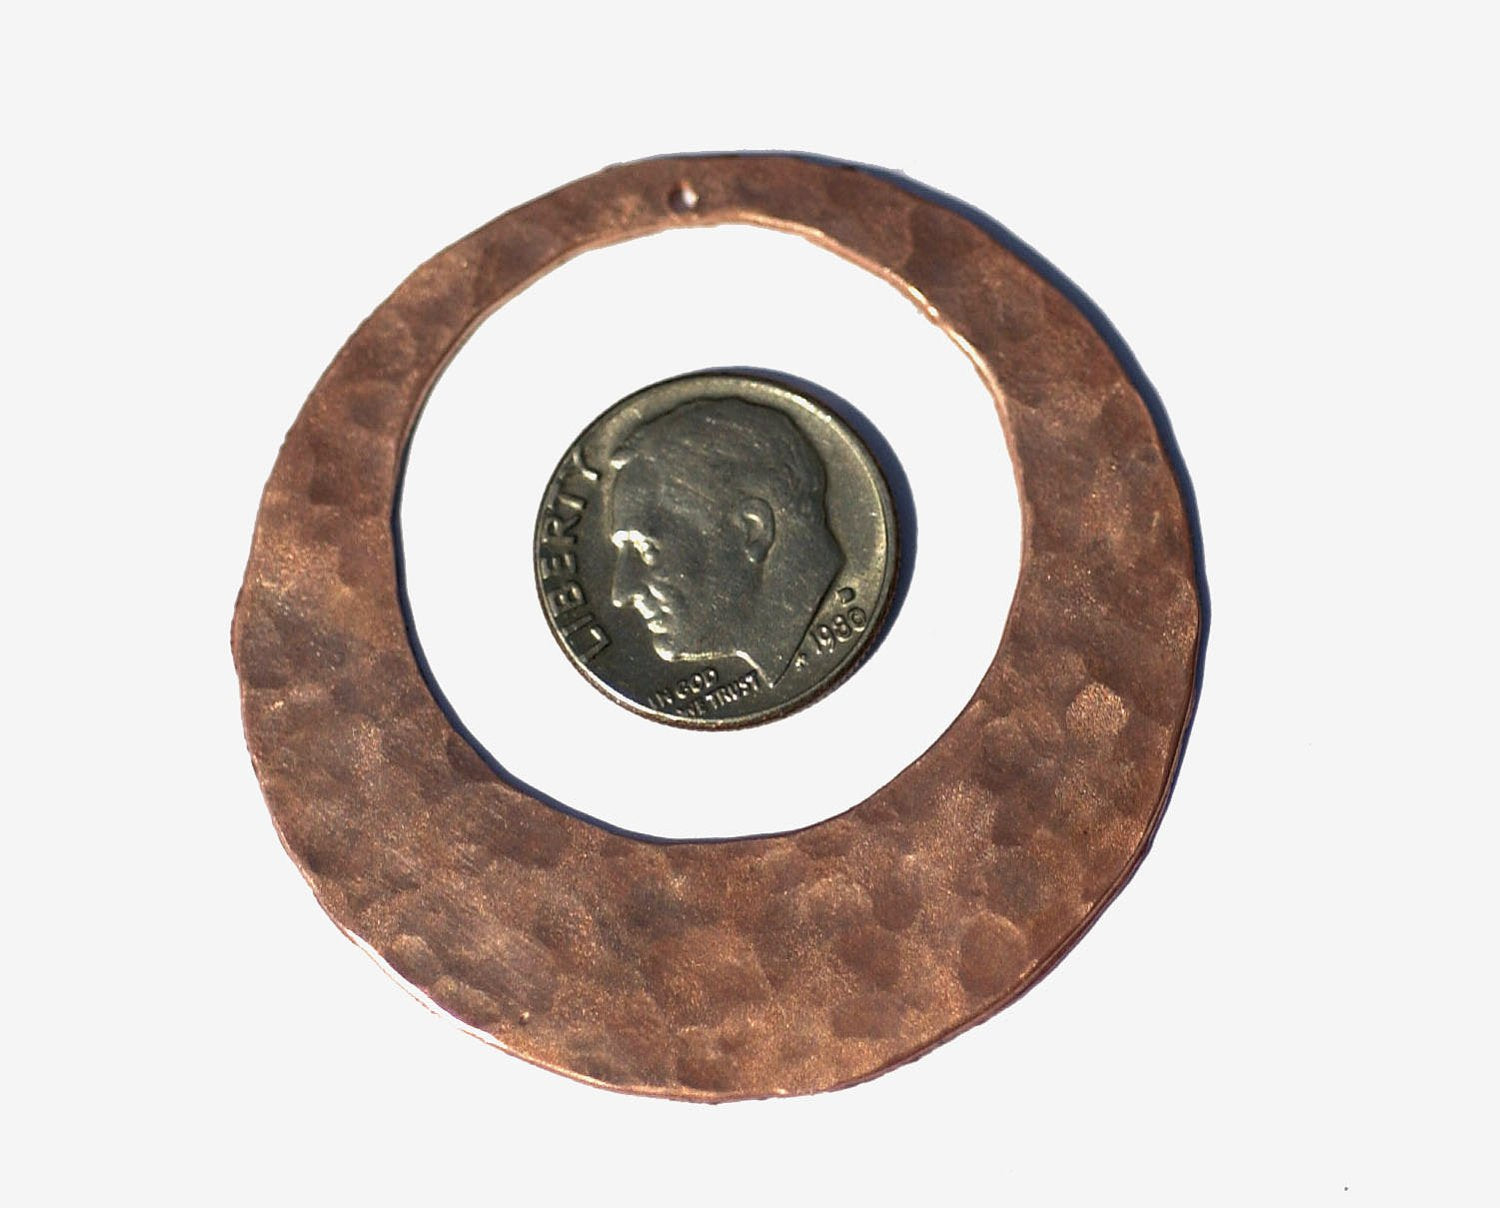 Copper Blank Hammered 45mm 20g Hoops for Earrings or Pendant Offset Circle for Enameling Stamping Texturing Blanks - 2 Pieces